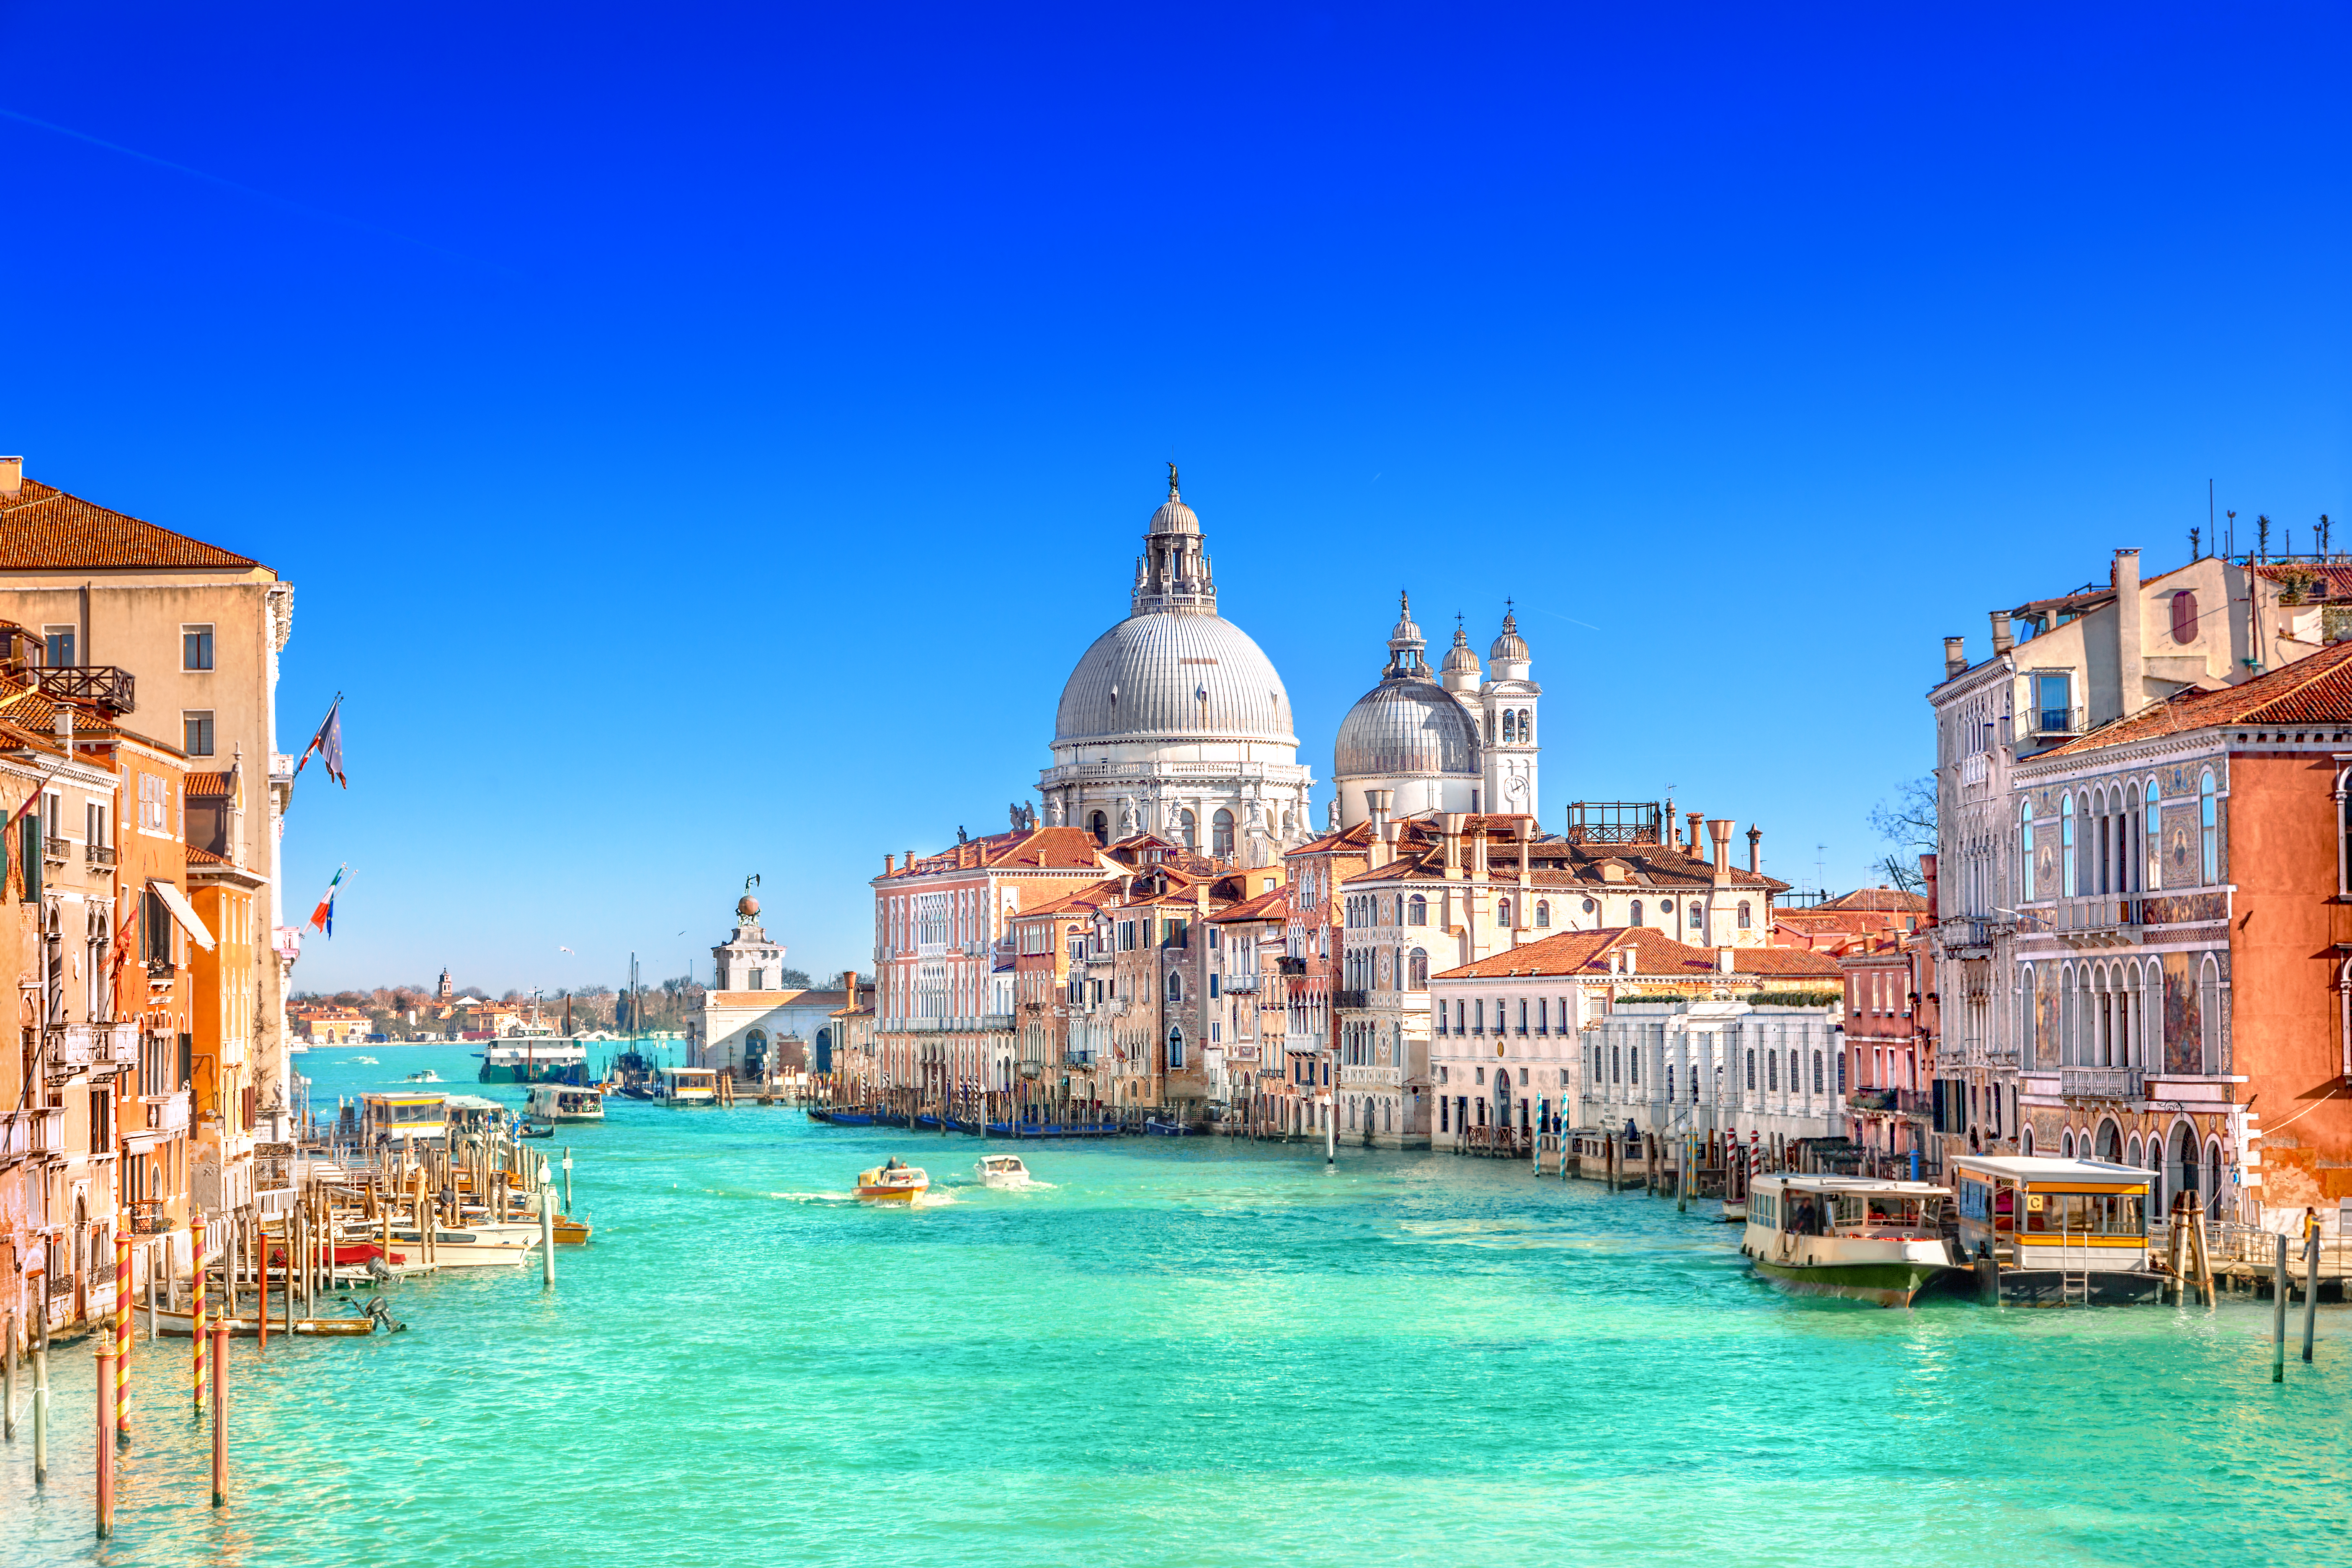 When in Venice, take in the breathtaking view of the Grand Canal